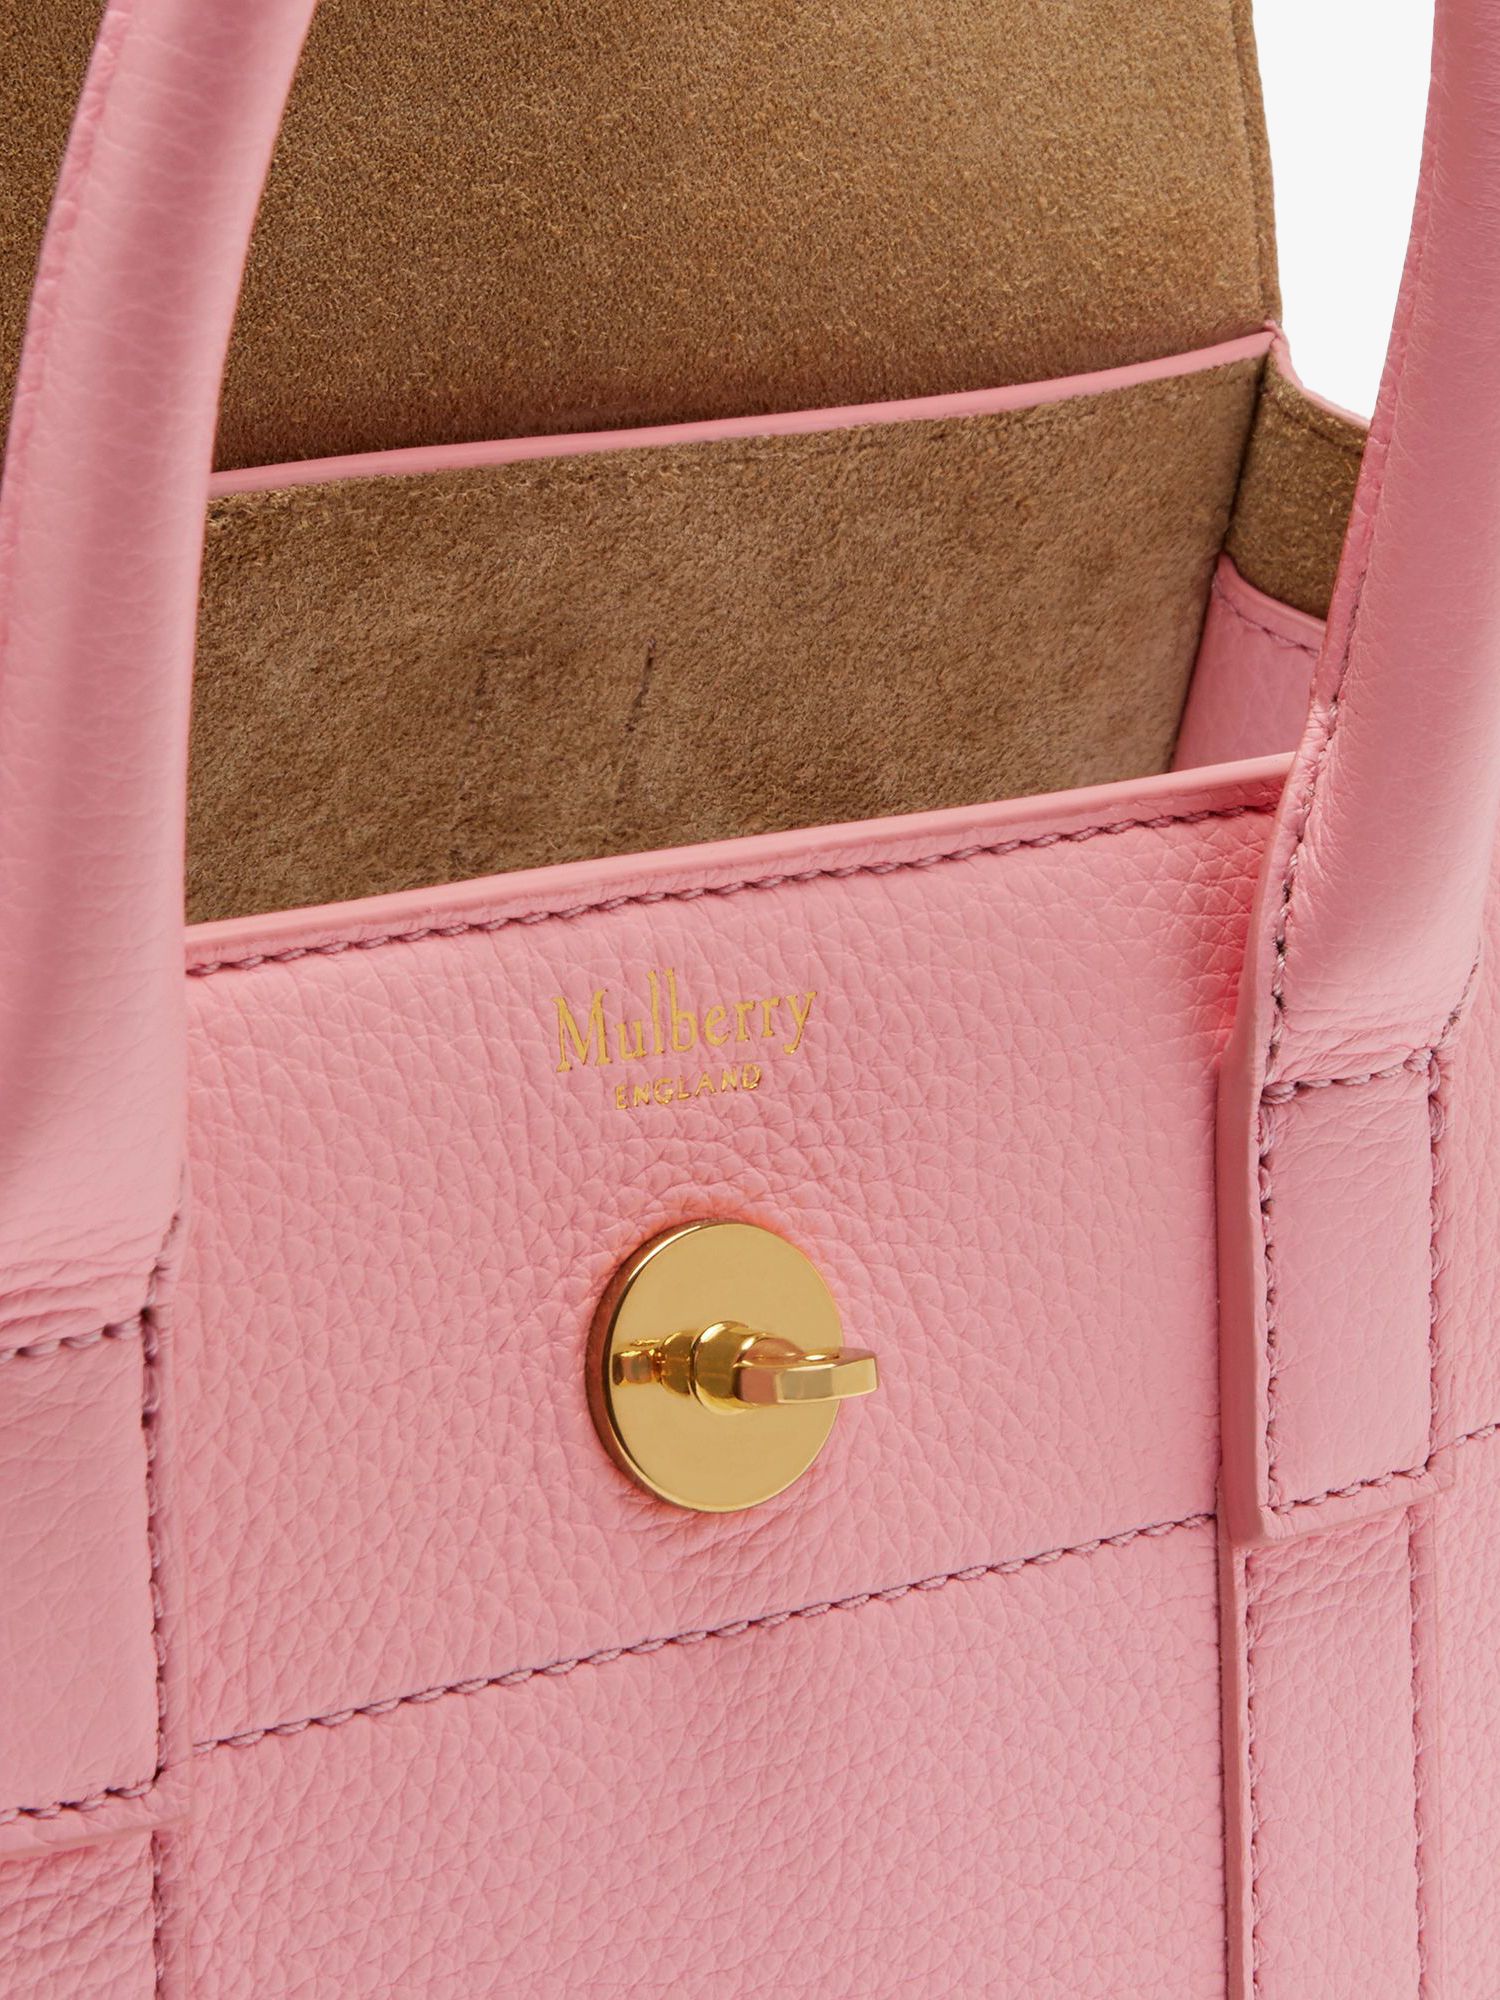 Mulberry Small Bayswater Small Classic Grain Leather Satchel Bag at ...